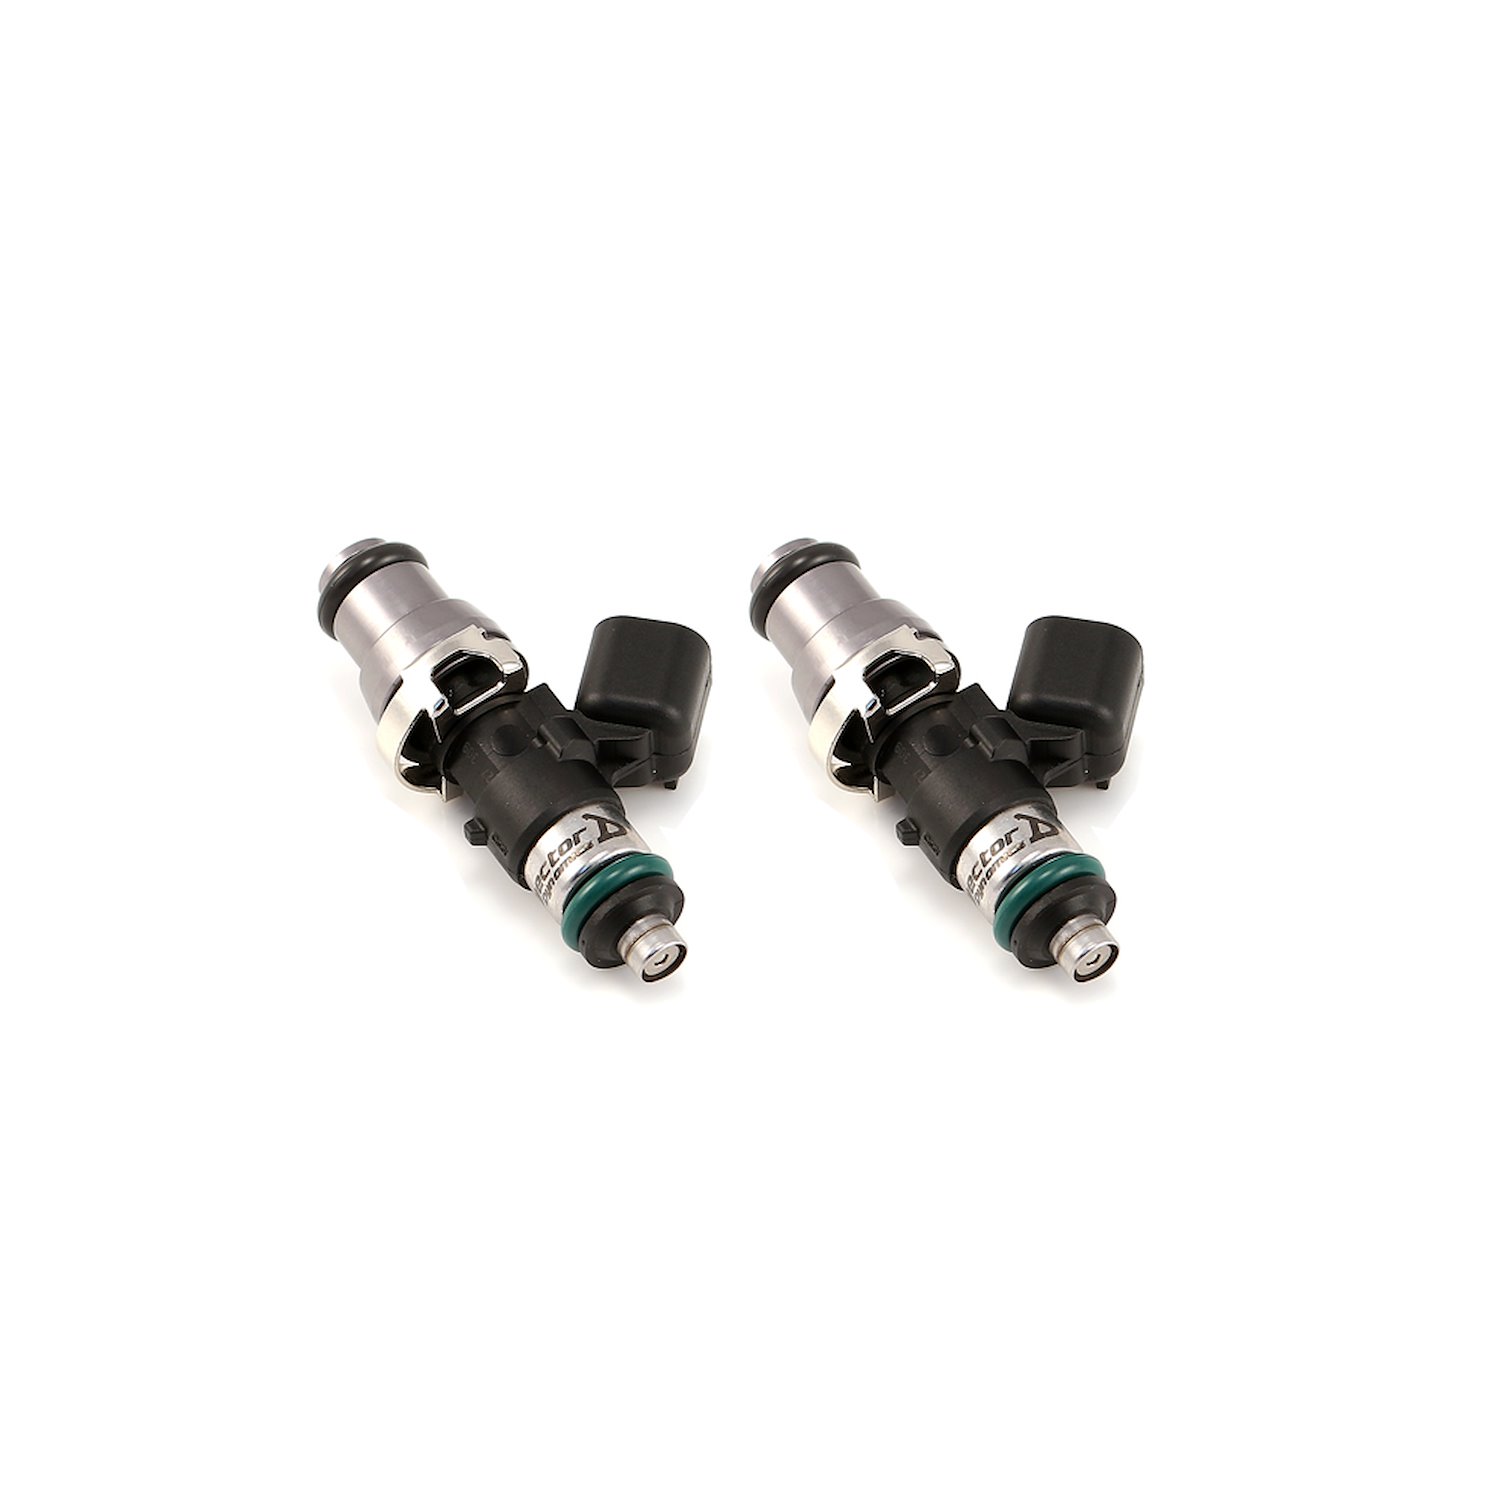 1300.48.14.14.2 1300cc Fuel Injector Set, 48 mm Length, 14 mm Top, 14 mm Lower O-Ring